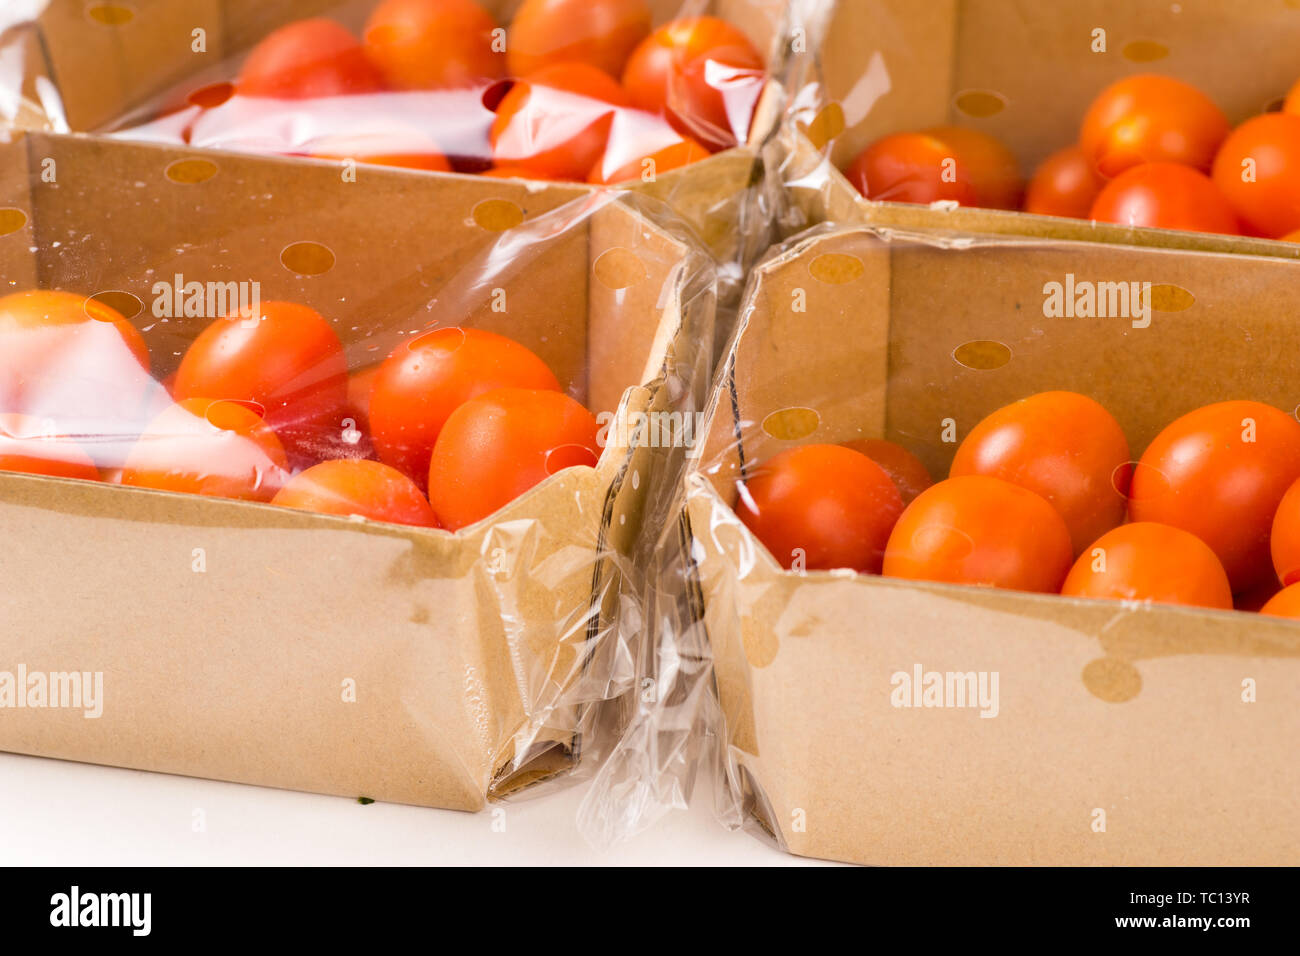 ripe cherry tomatoes packages in box and plastic close up and isolated on white background Stock Photo